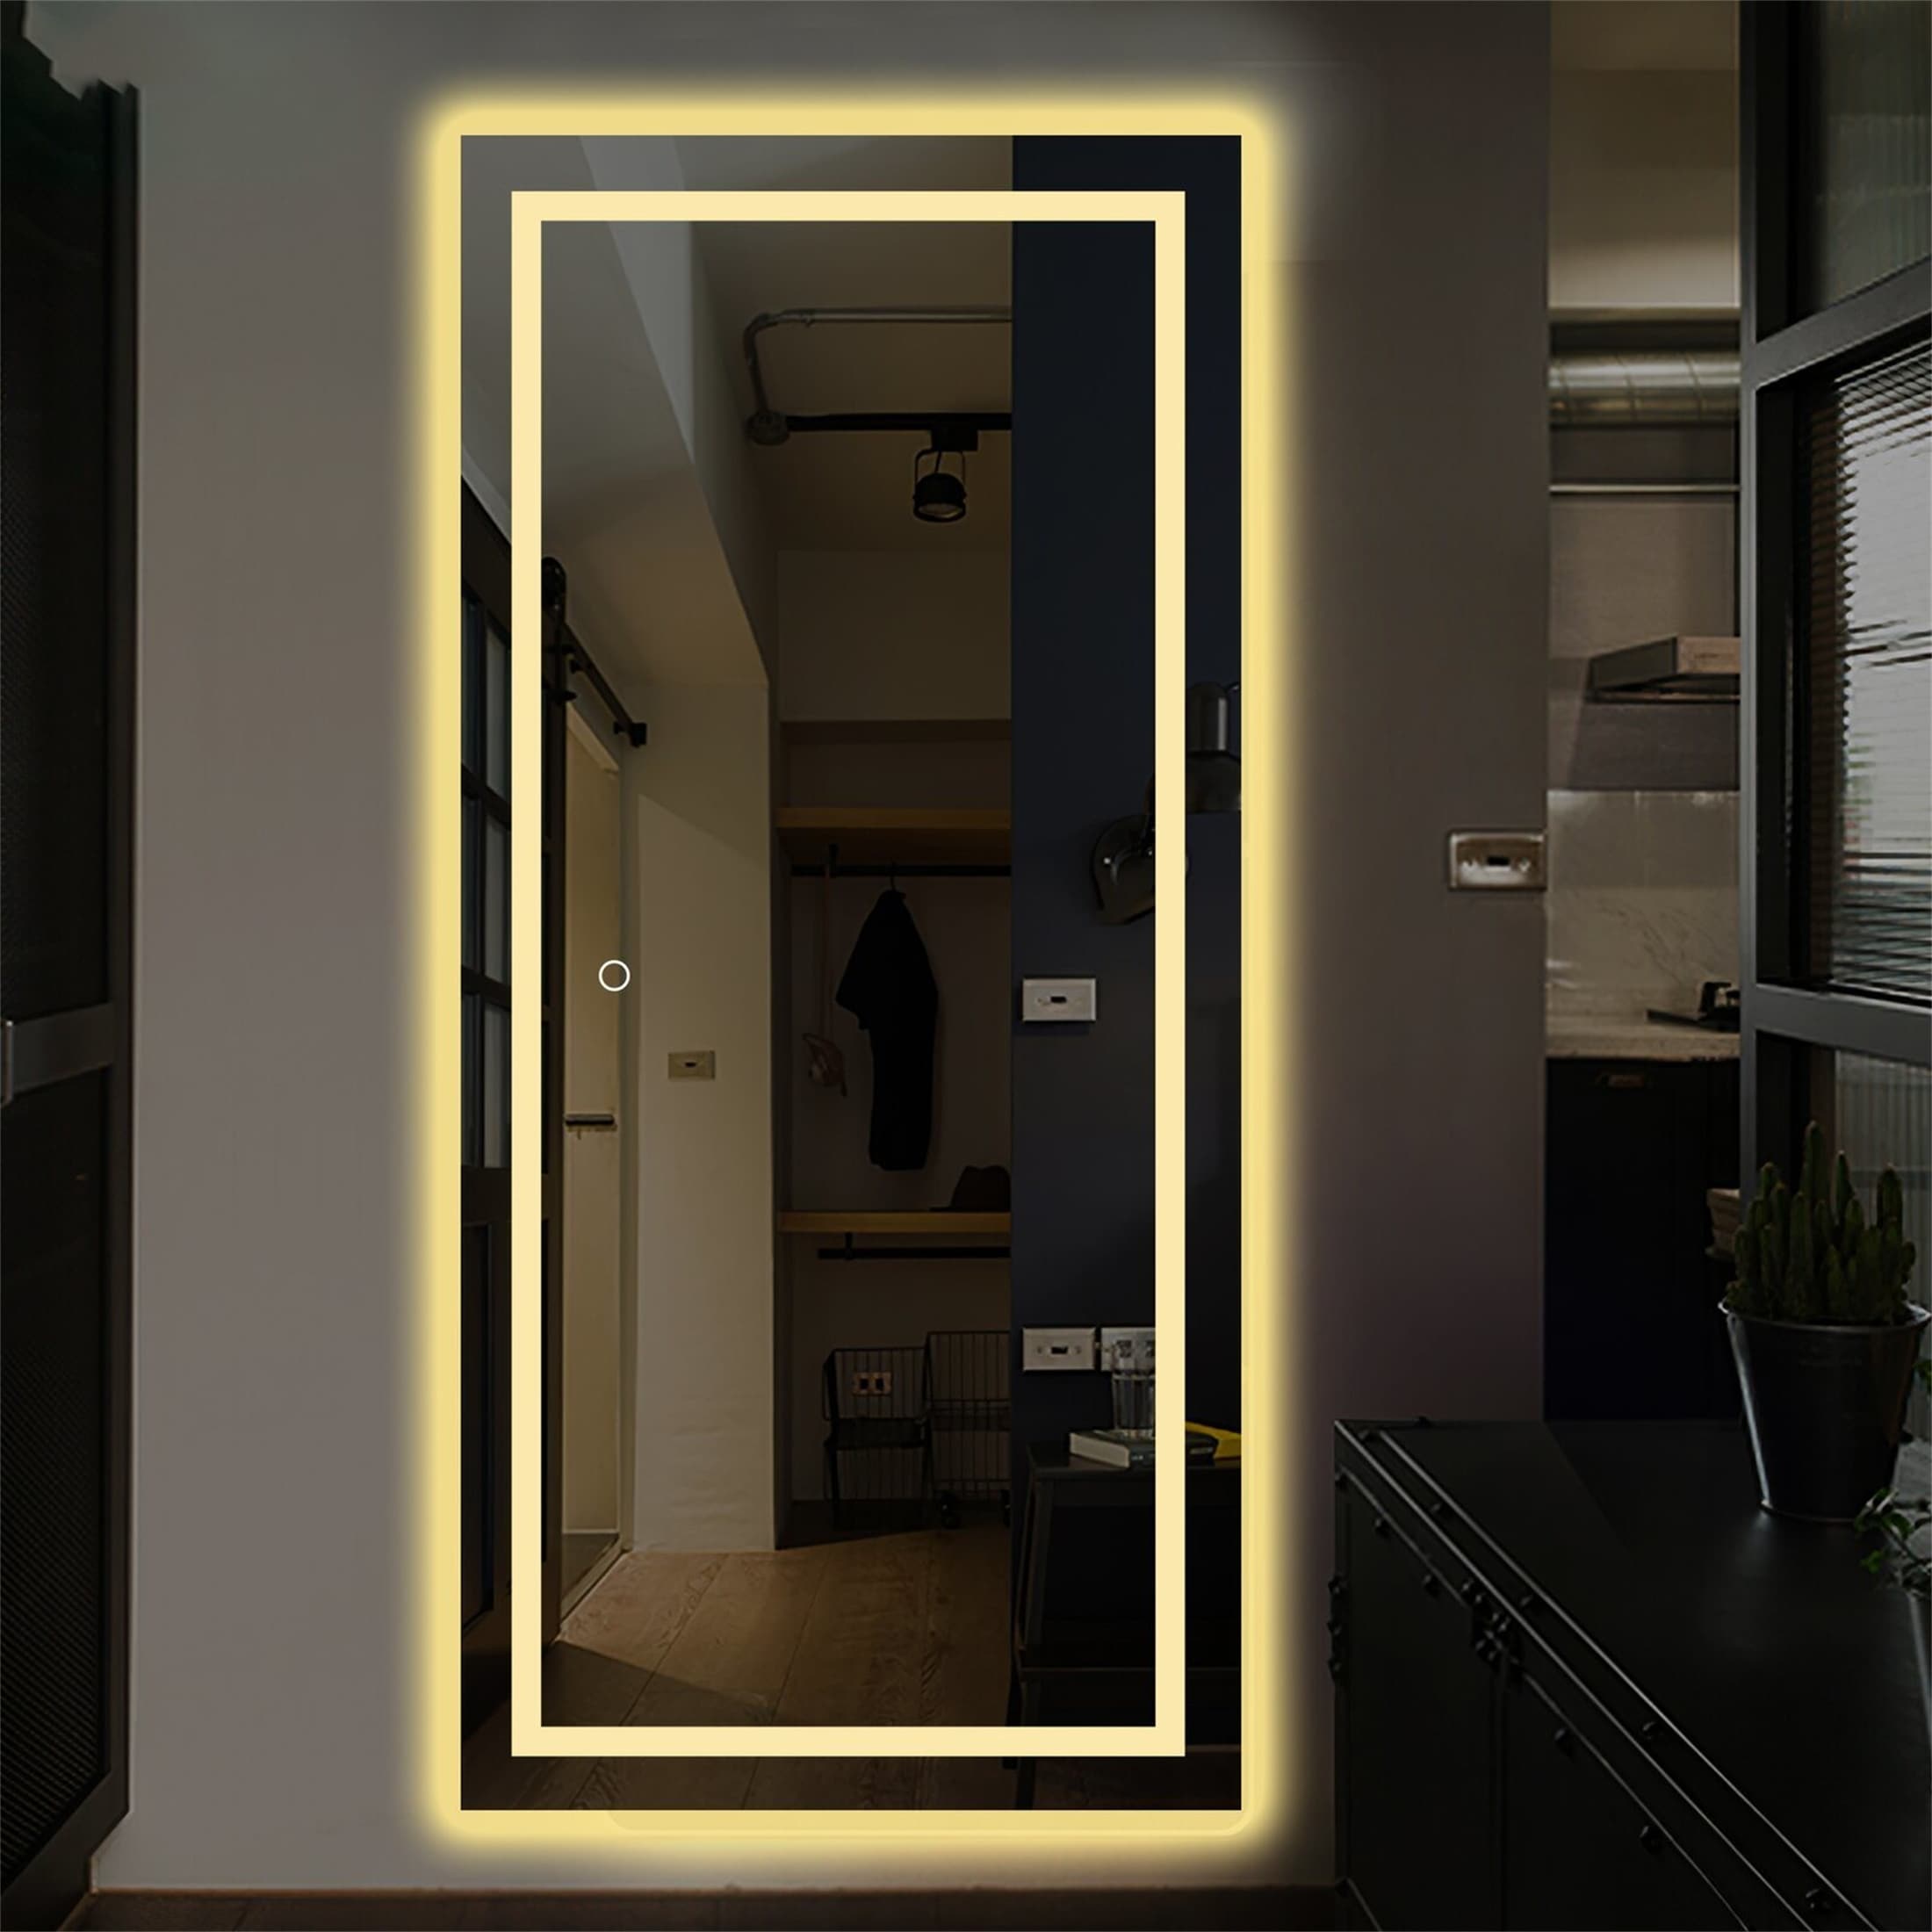 Lotus-47x22 Full Length Body LED Mirror Bedroom Long Mirror with Lights